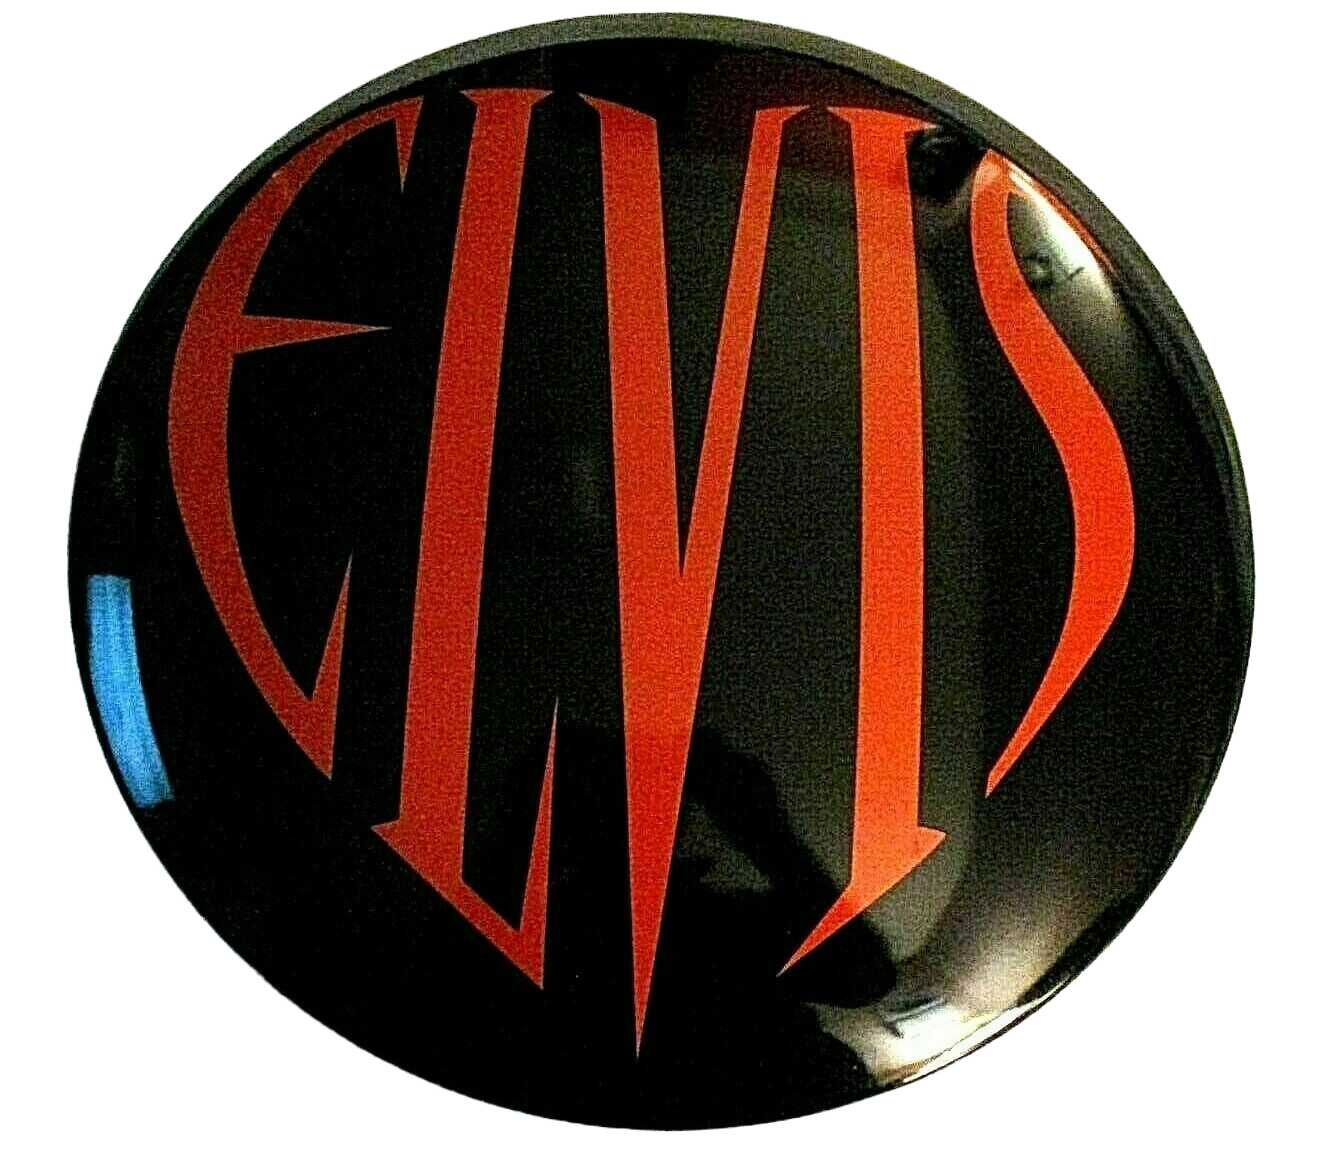 Sign ELVIS 17" ROUND METAL DOME SIGN Wall Sign Decor Heart